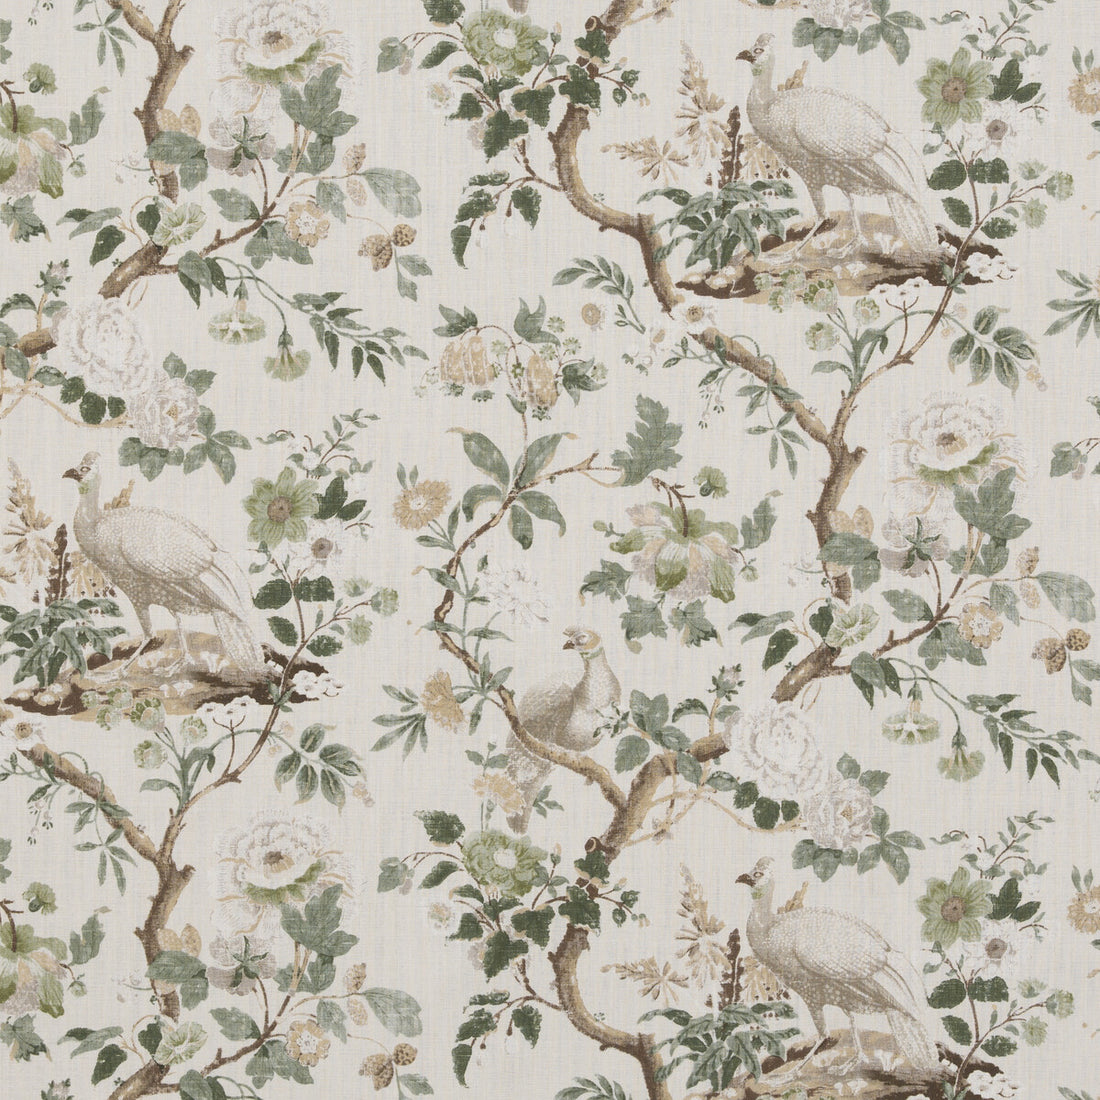 Broughton Rose fabric in green color - pattern BP10949.3.0 - by G P &amp; J Baker in the Ashmore collection